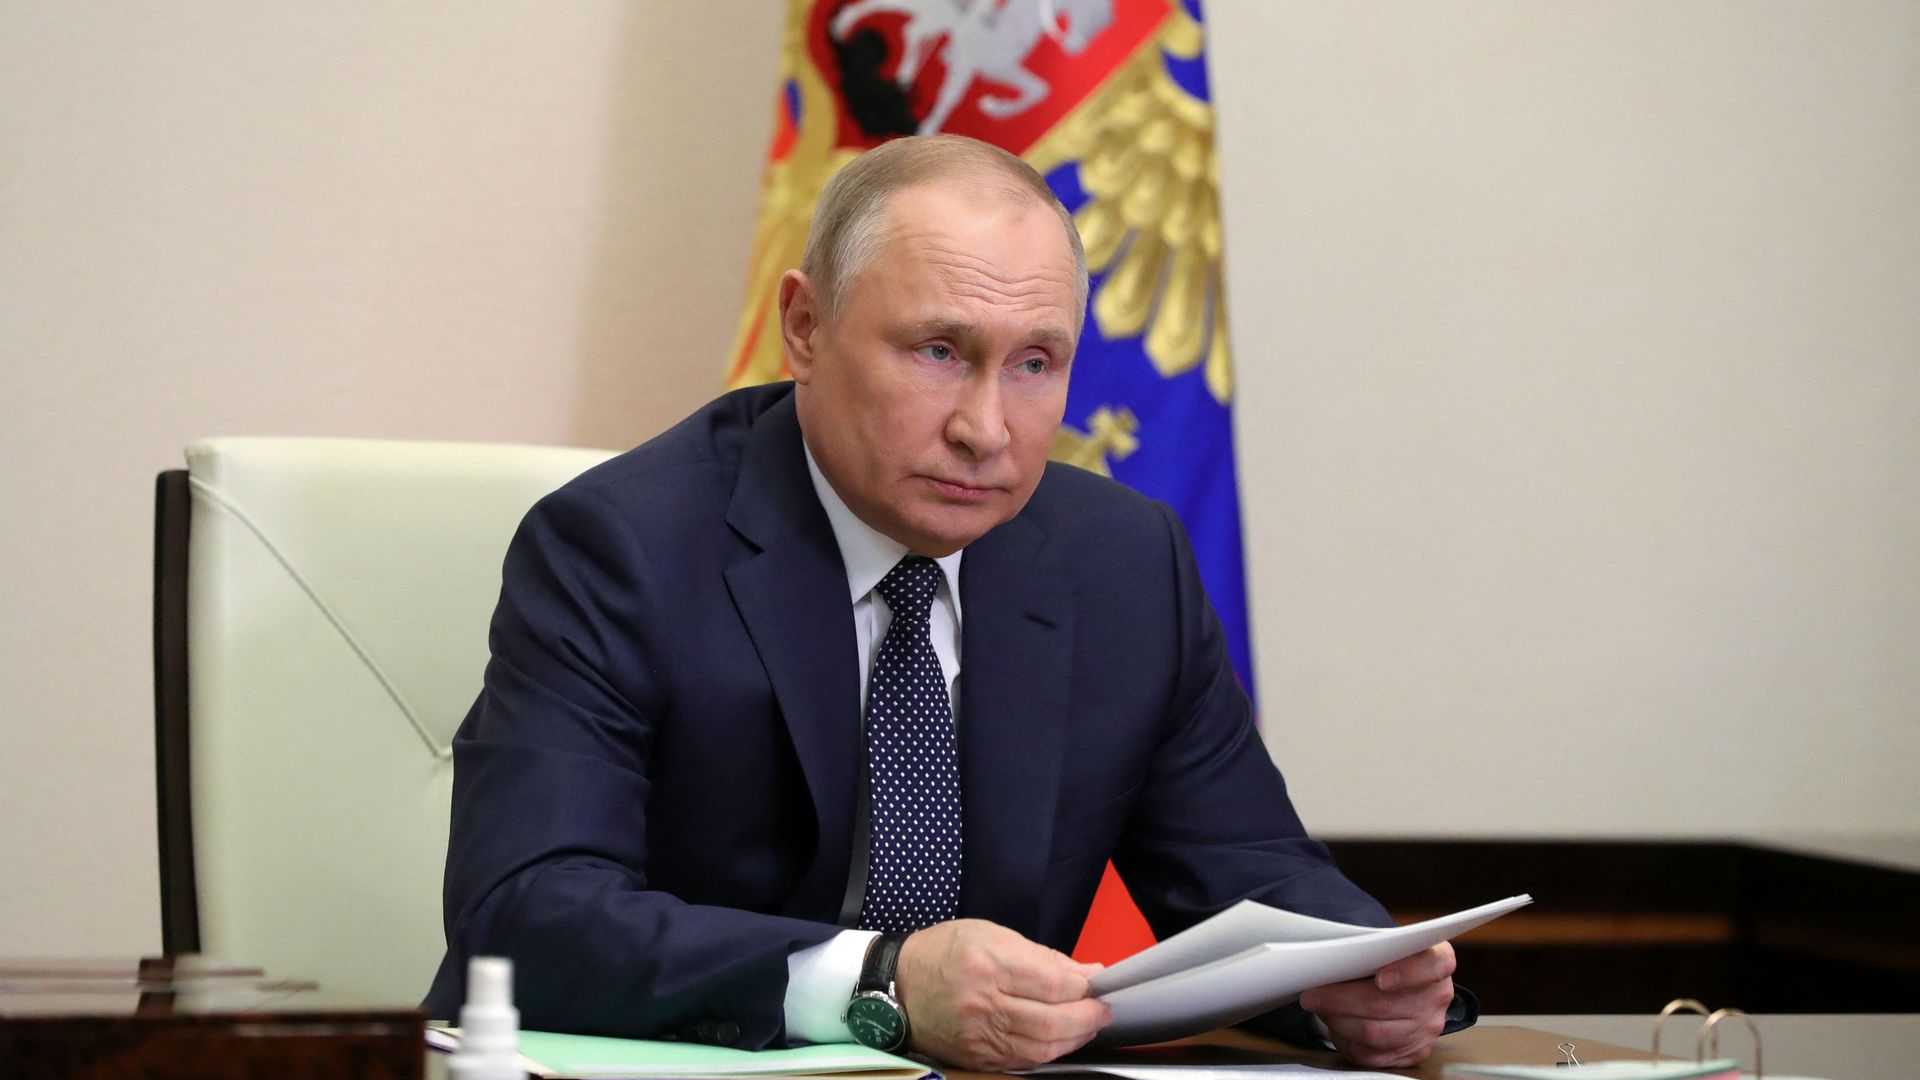 Russian President Vladimir Putin during a virtual meeting in Moscow on March 31.